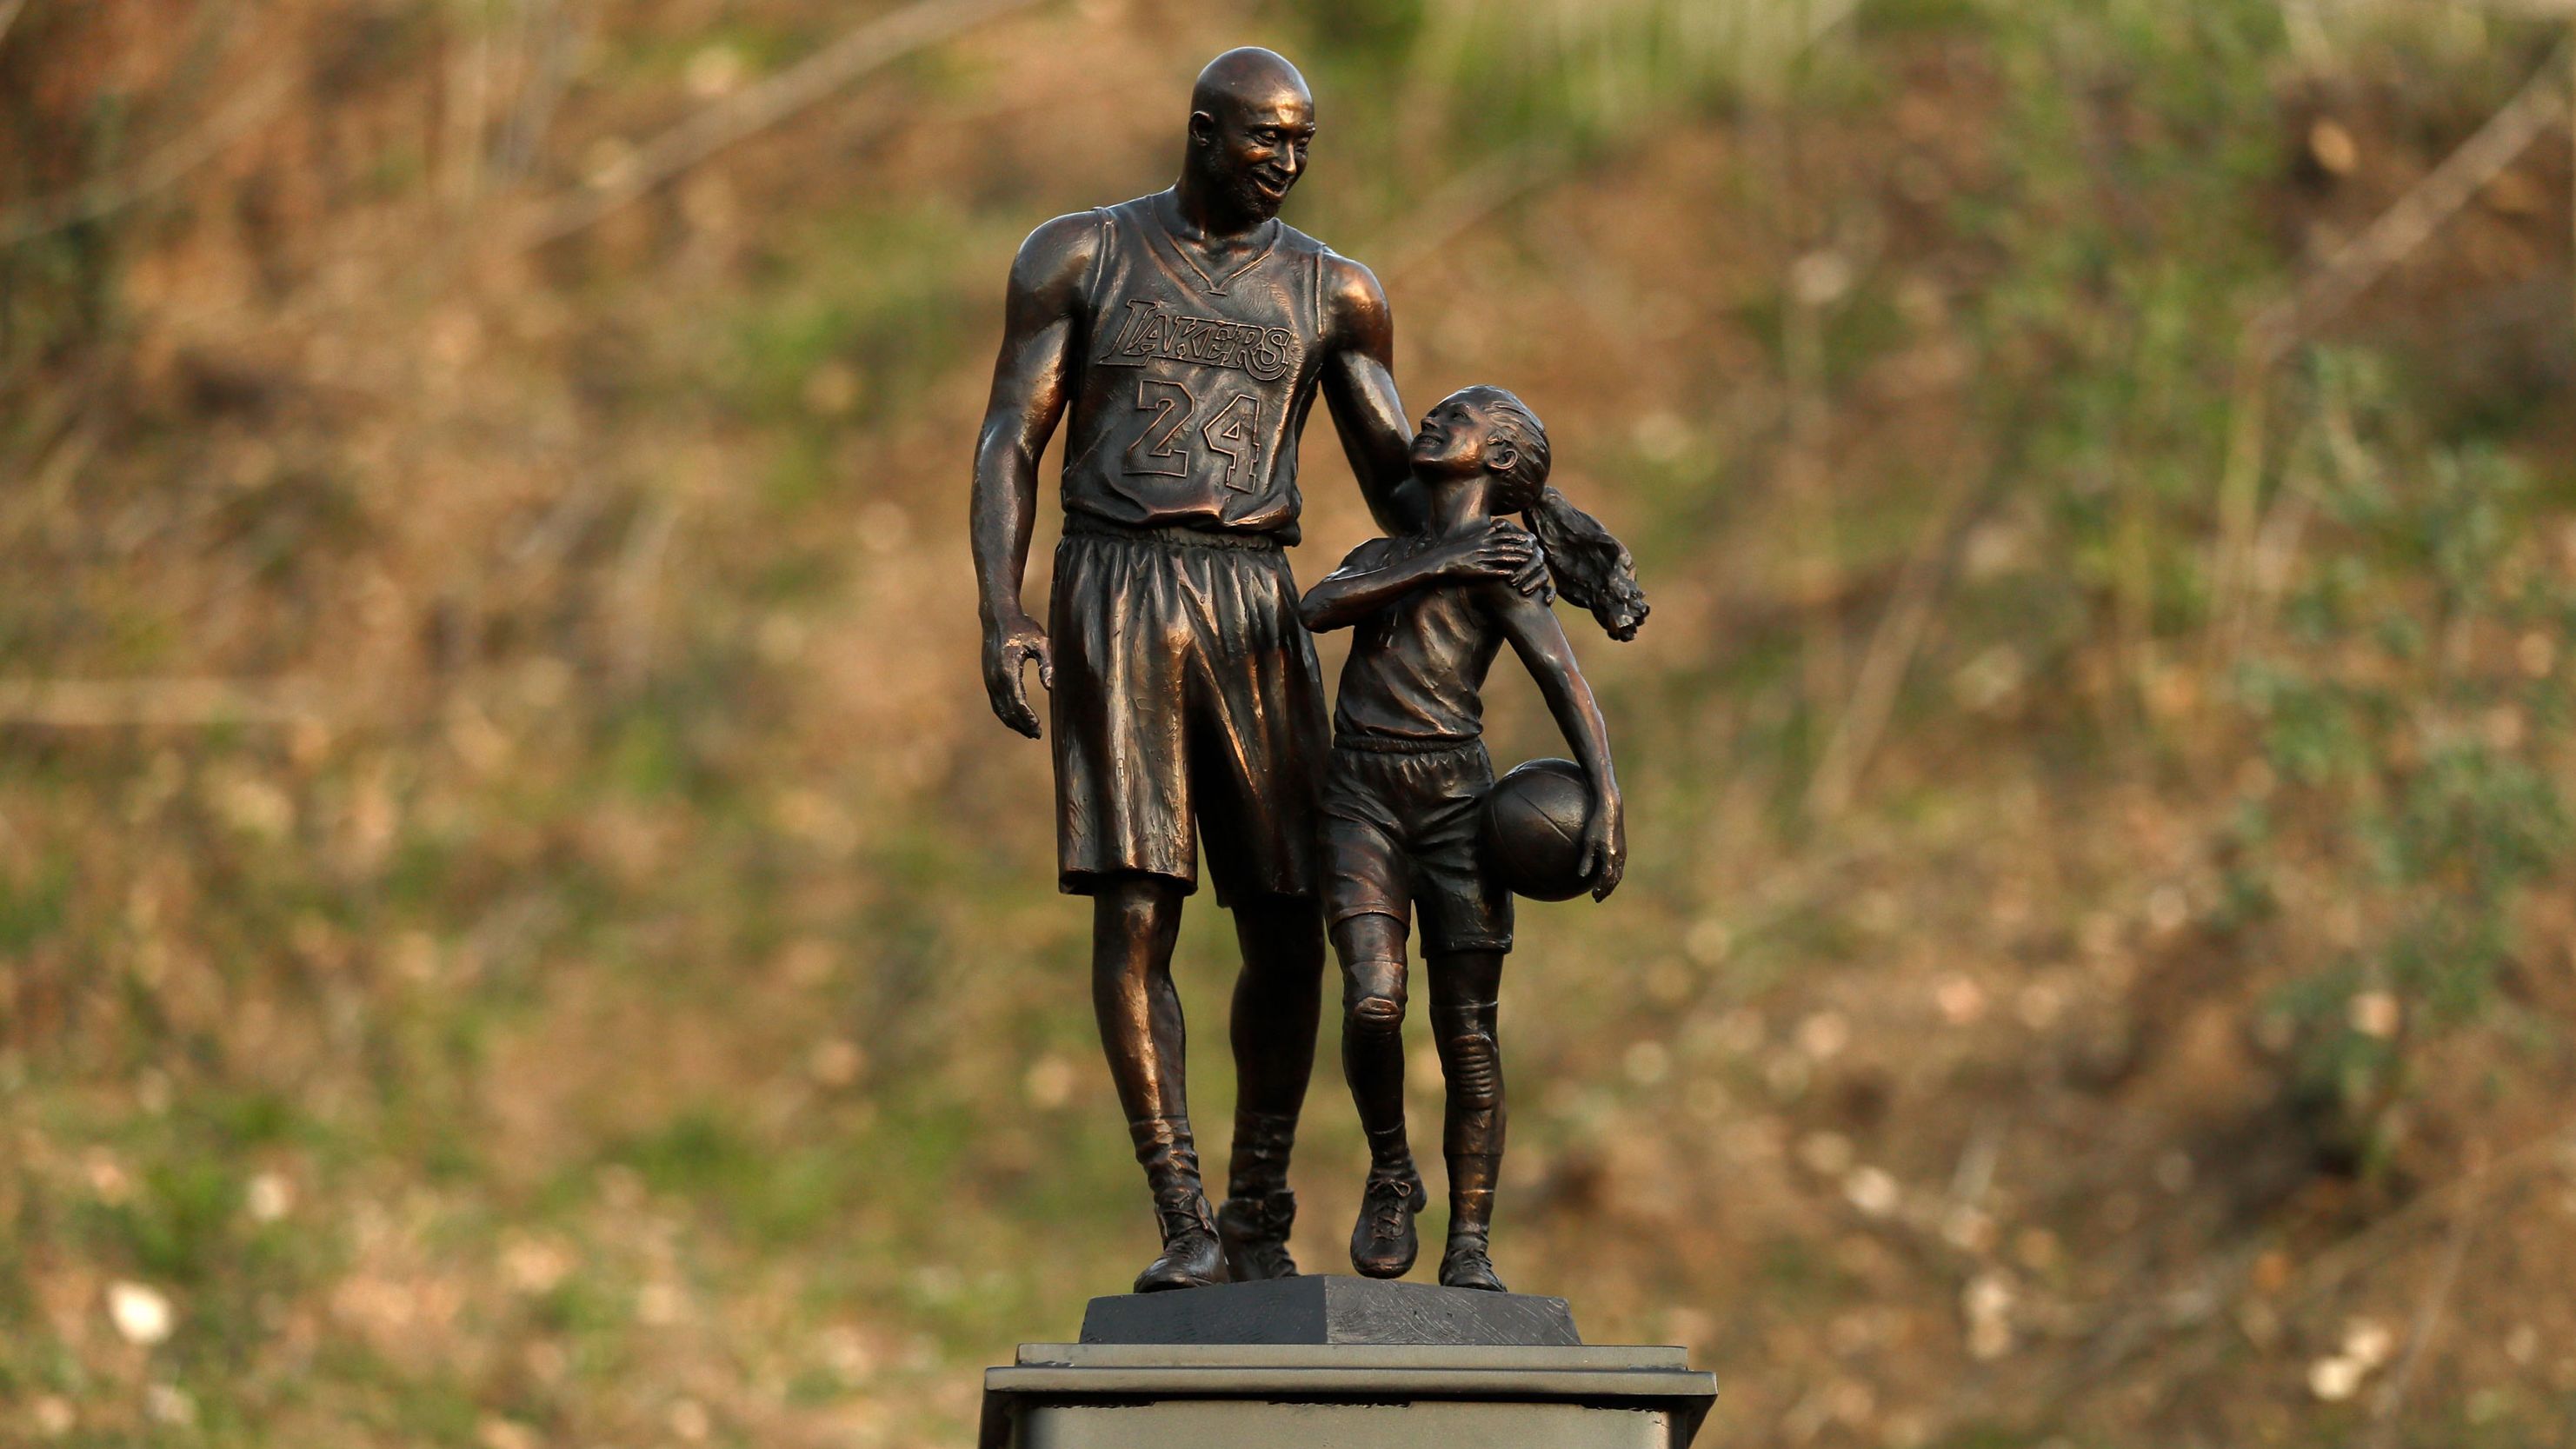 A bronze sculpture of Kobe Bryant and Gianna Bryant is displayed Wednesday in Calabasas, California.